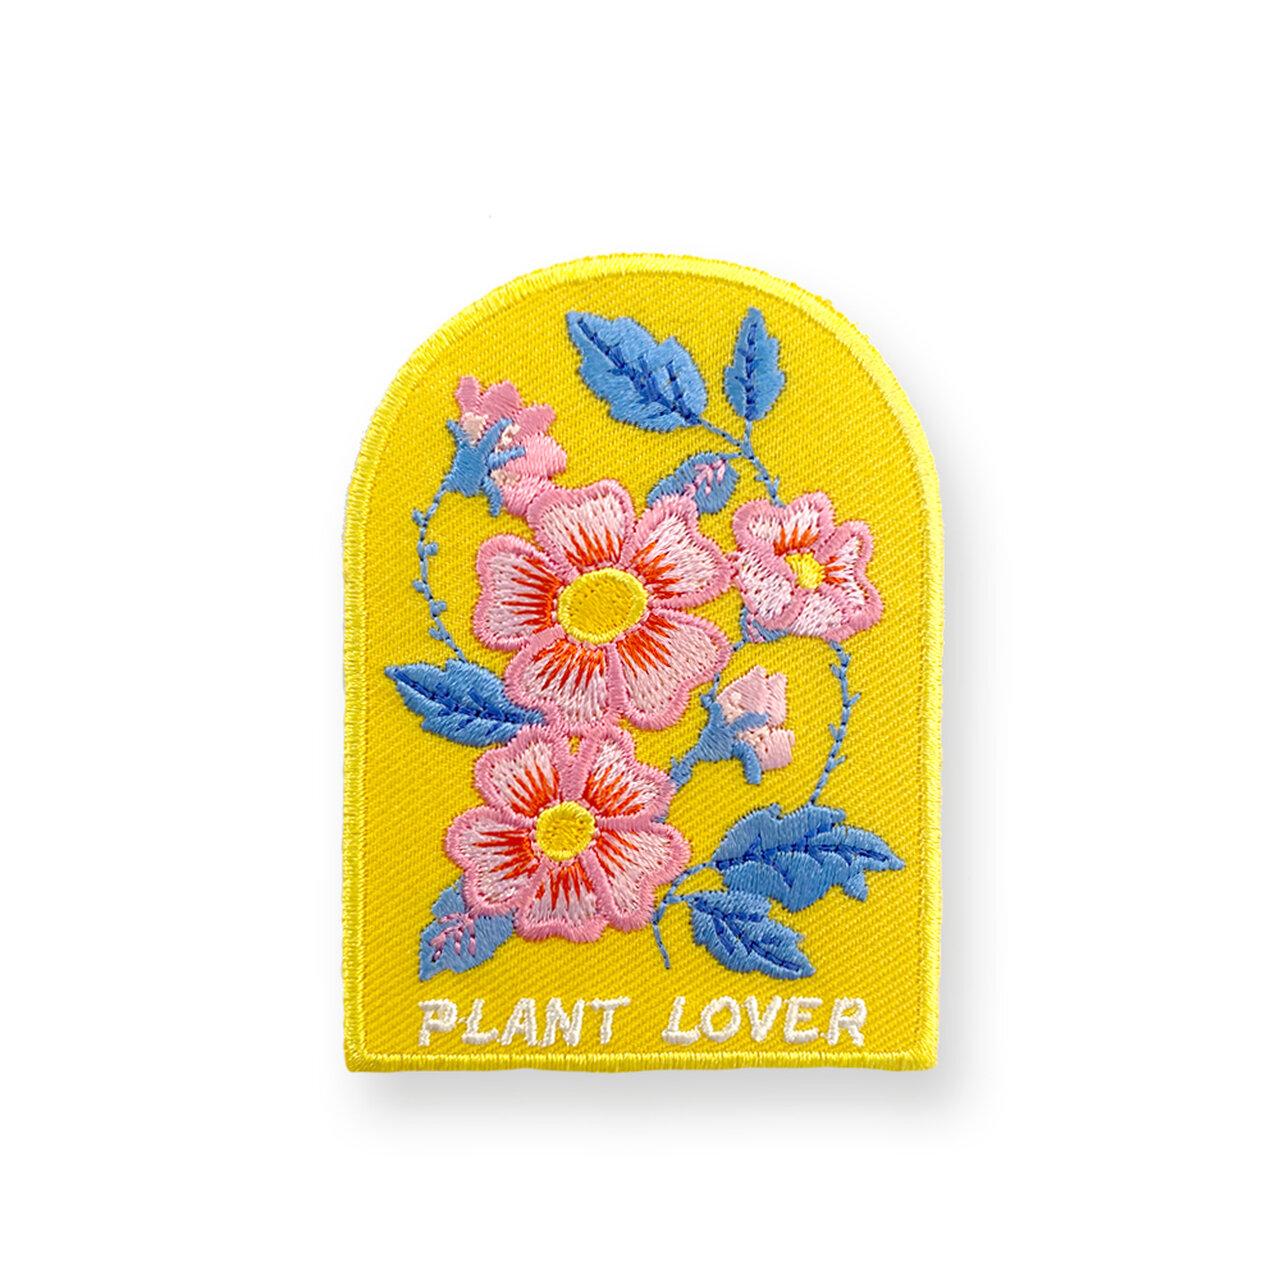 "Plant Lover" embroidered, iron on patch.